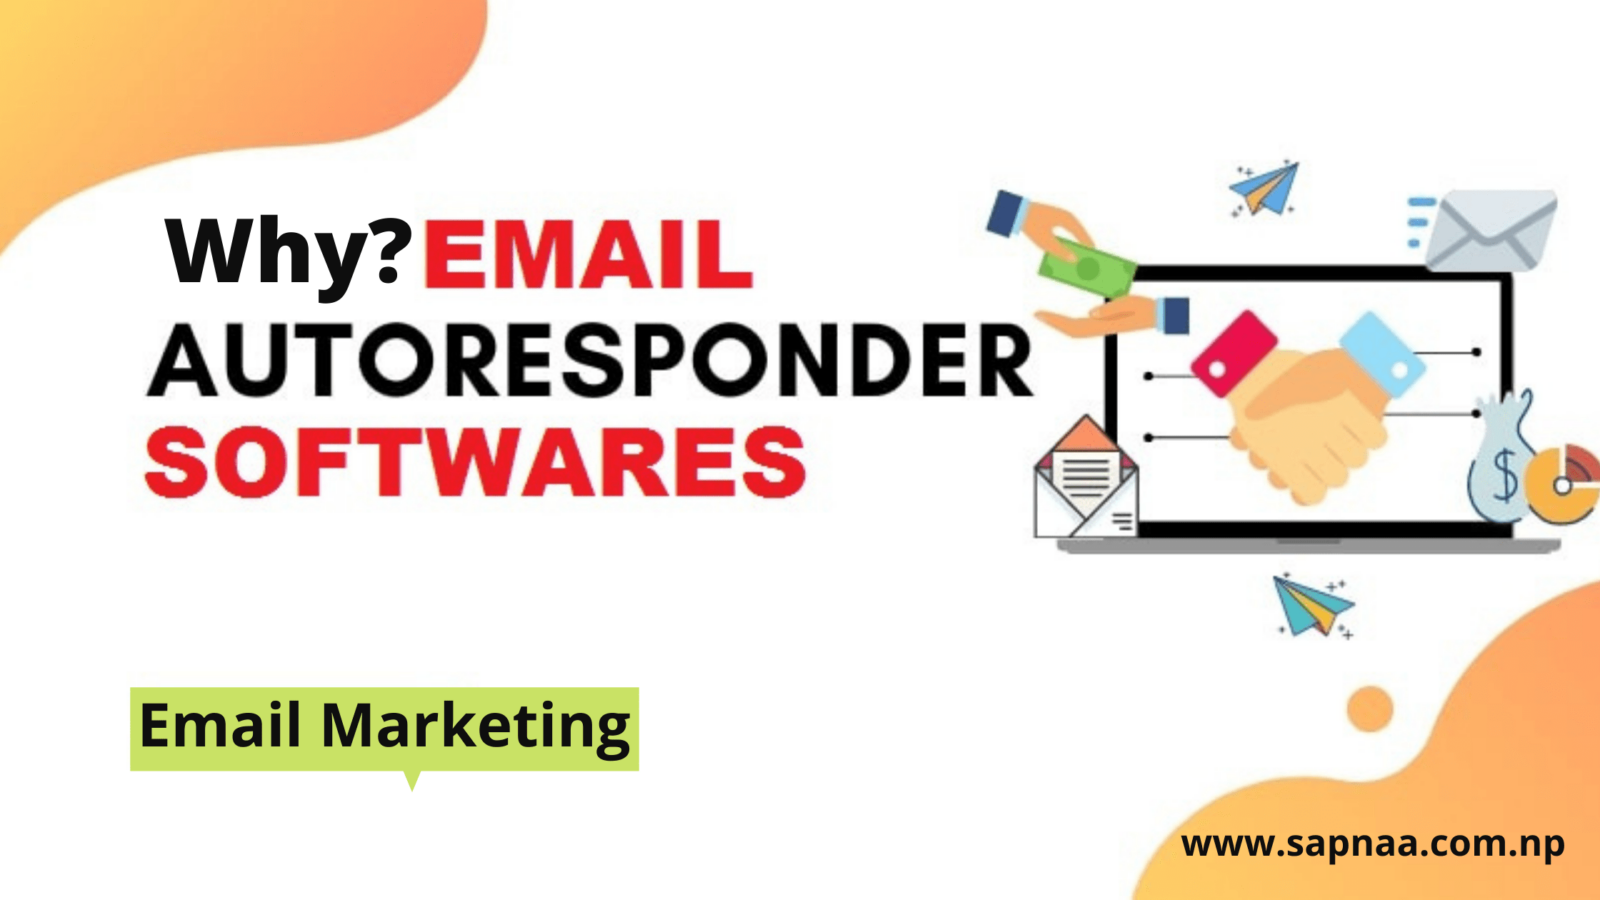 Why I use Email Autoresponder?